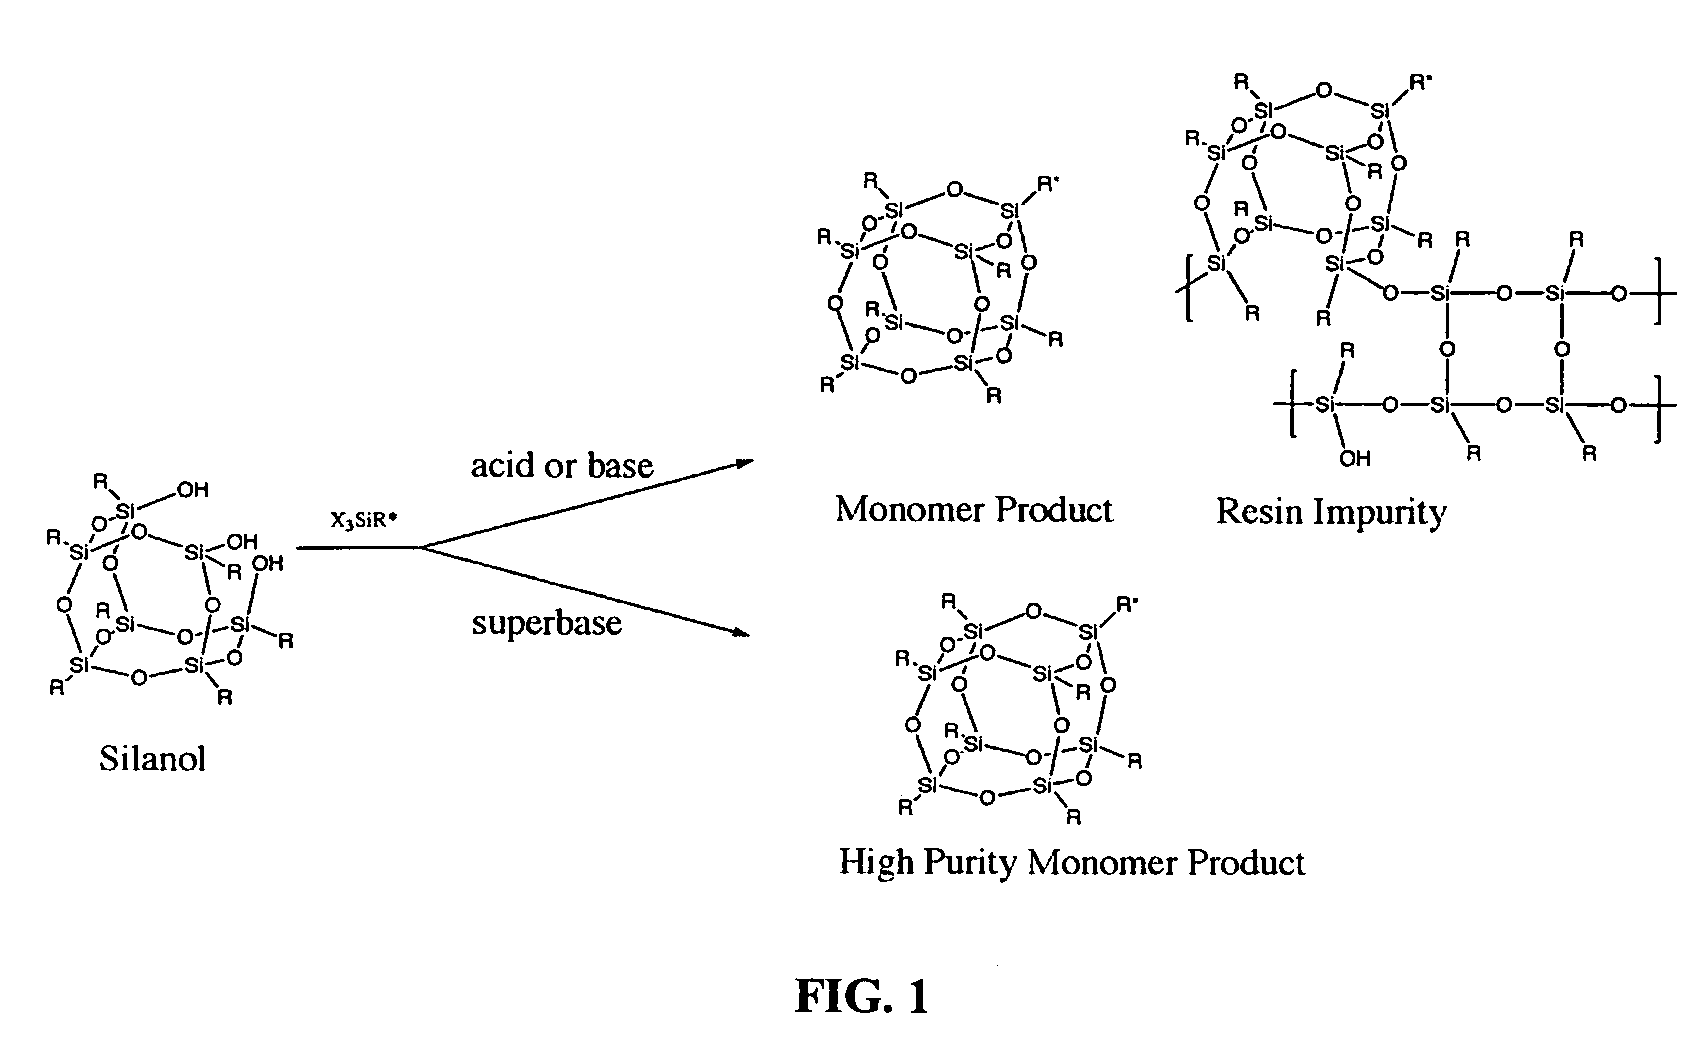 Process for highly purified polyhedral oligomeric silsesquioxane monomers